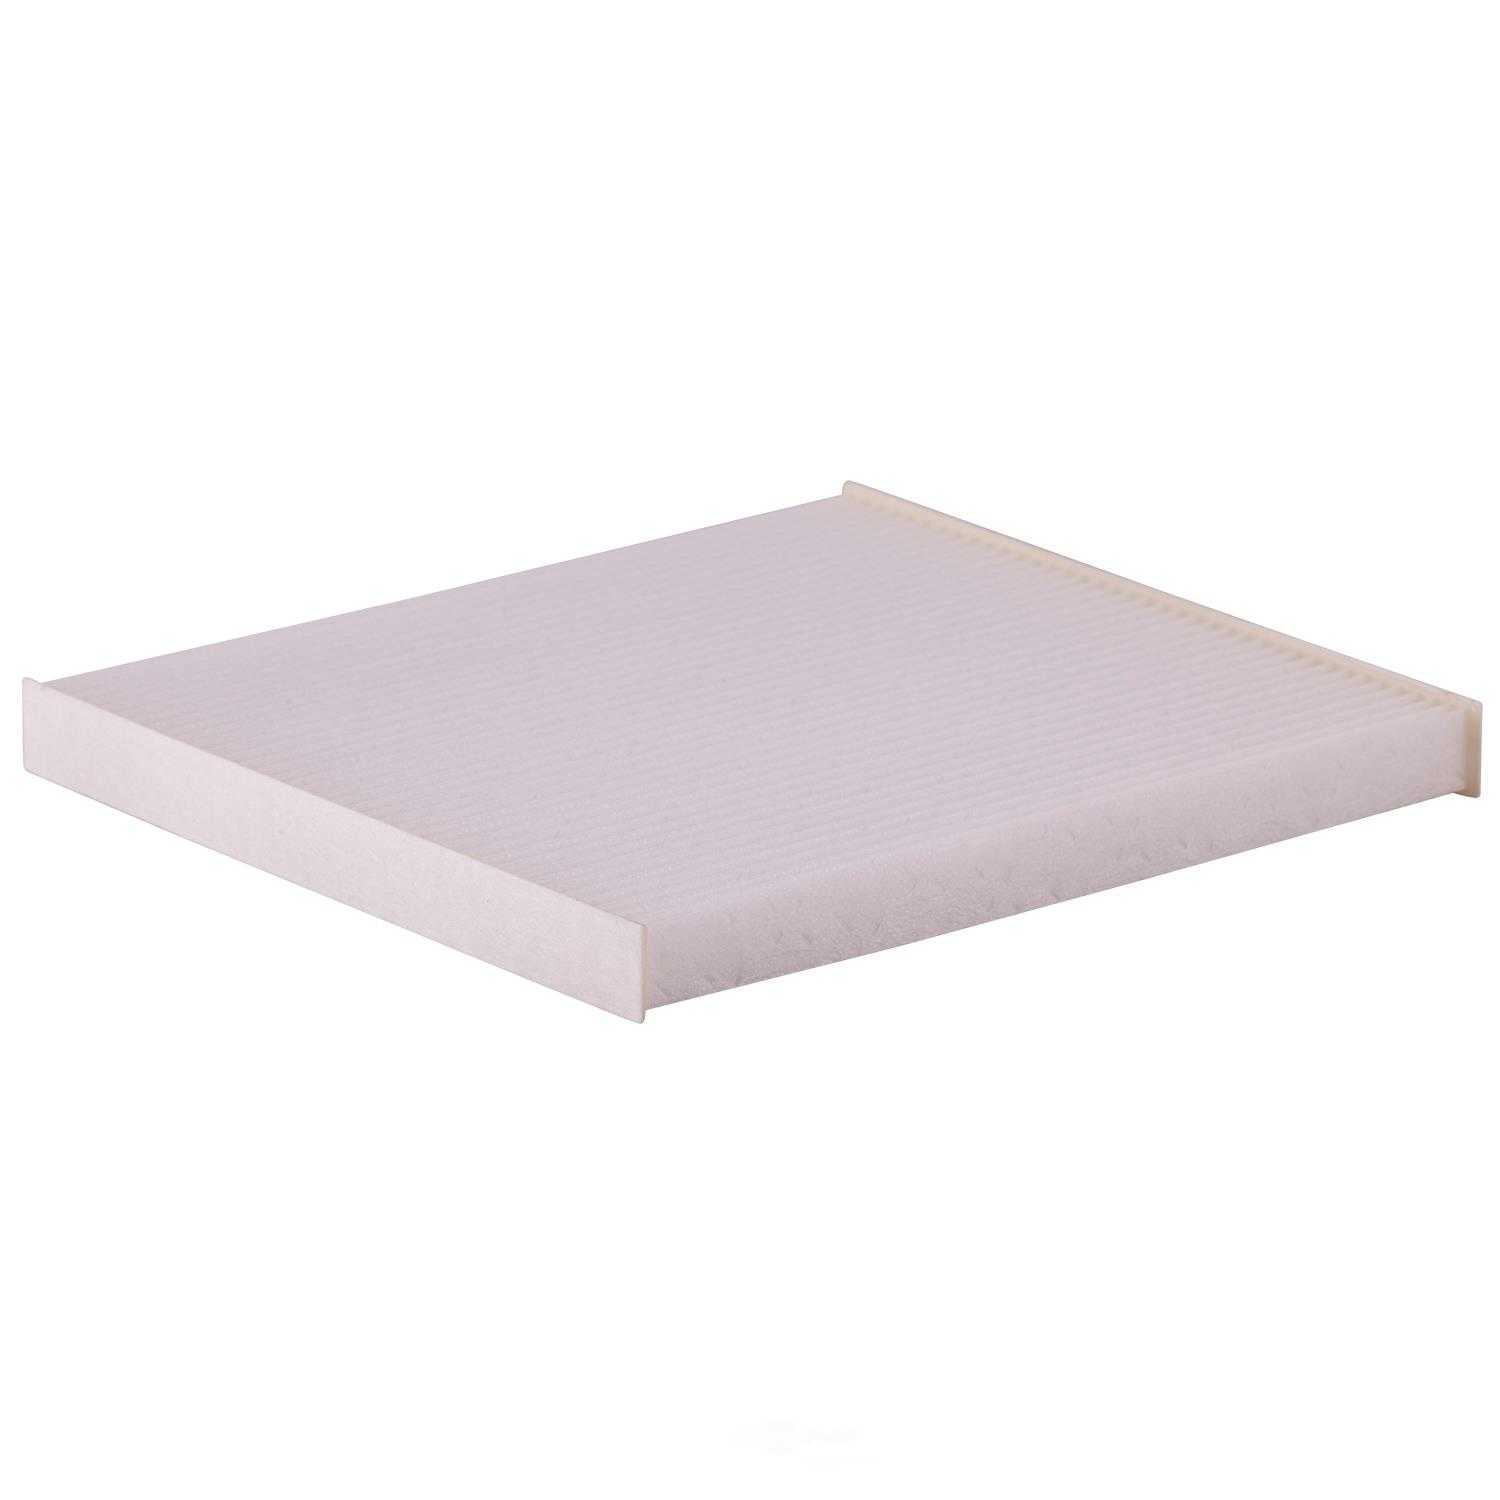 PRONTO/ID USA - Cabin Air Filter - PNP PC5491